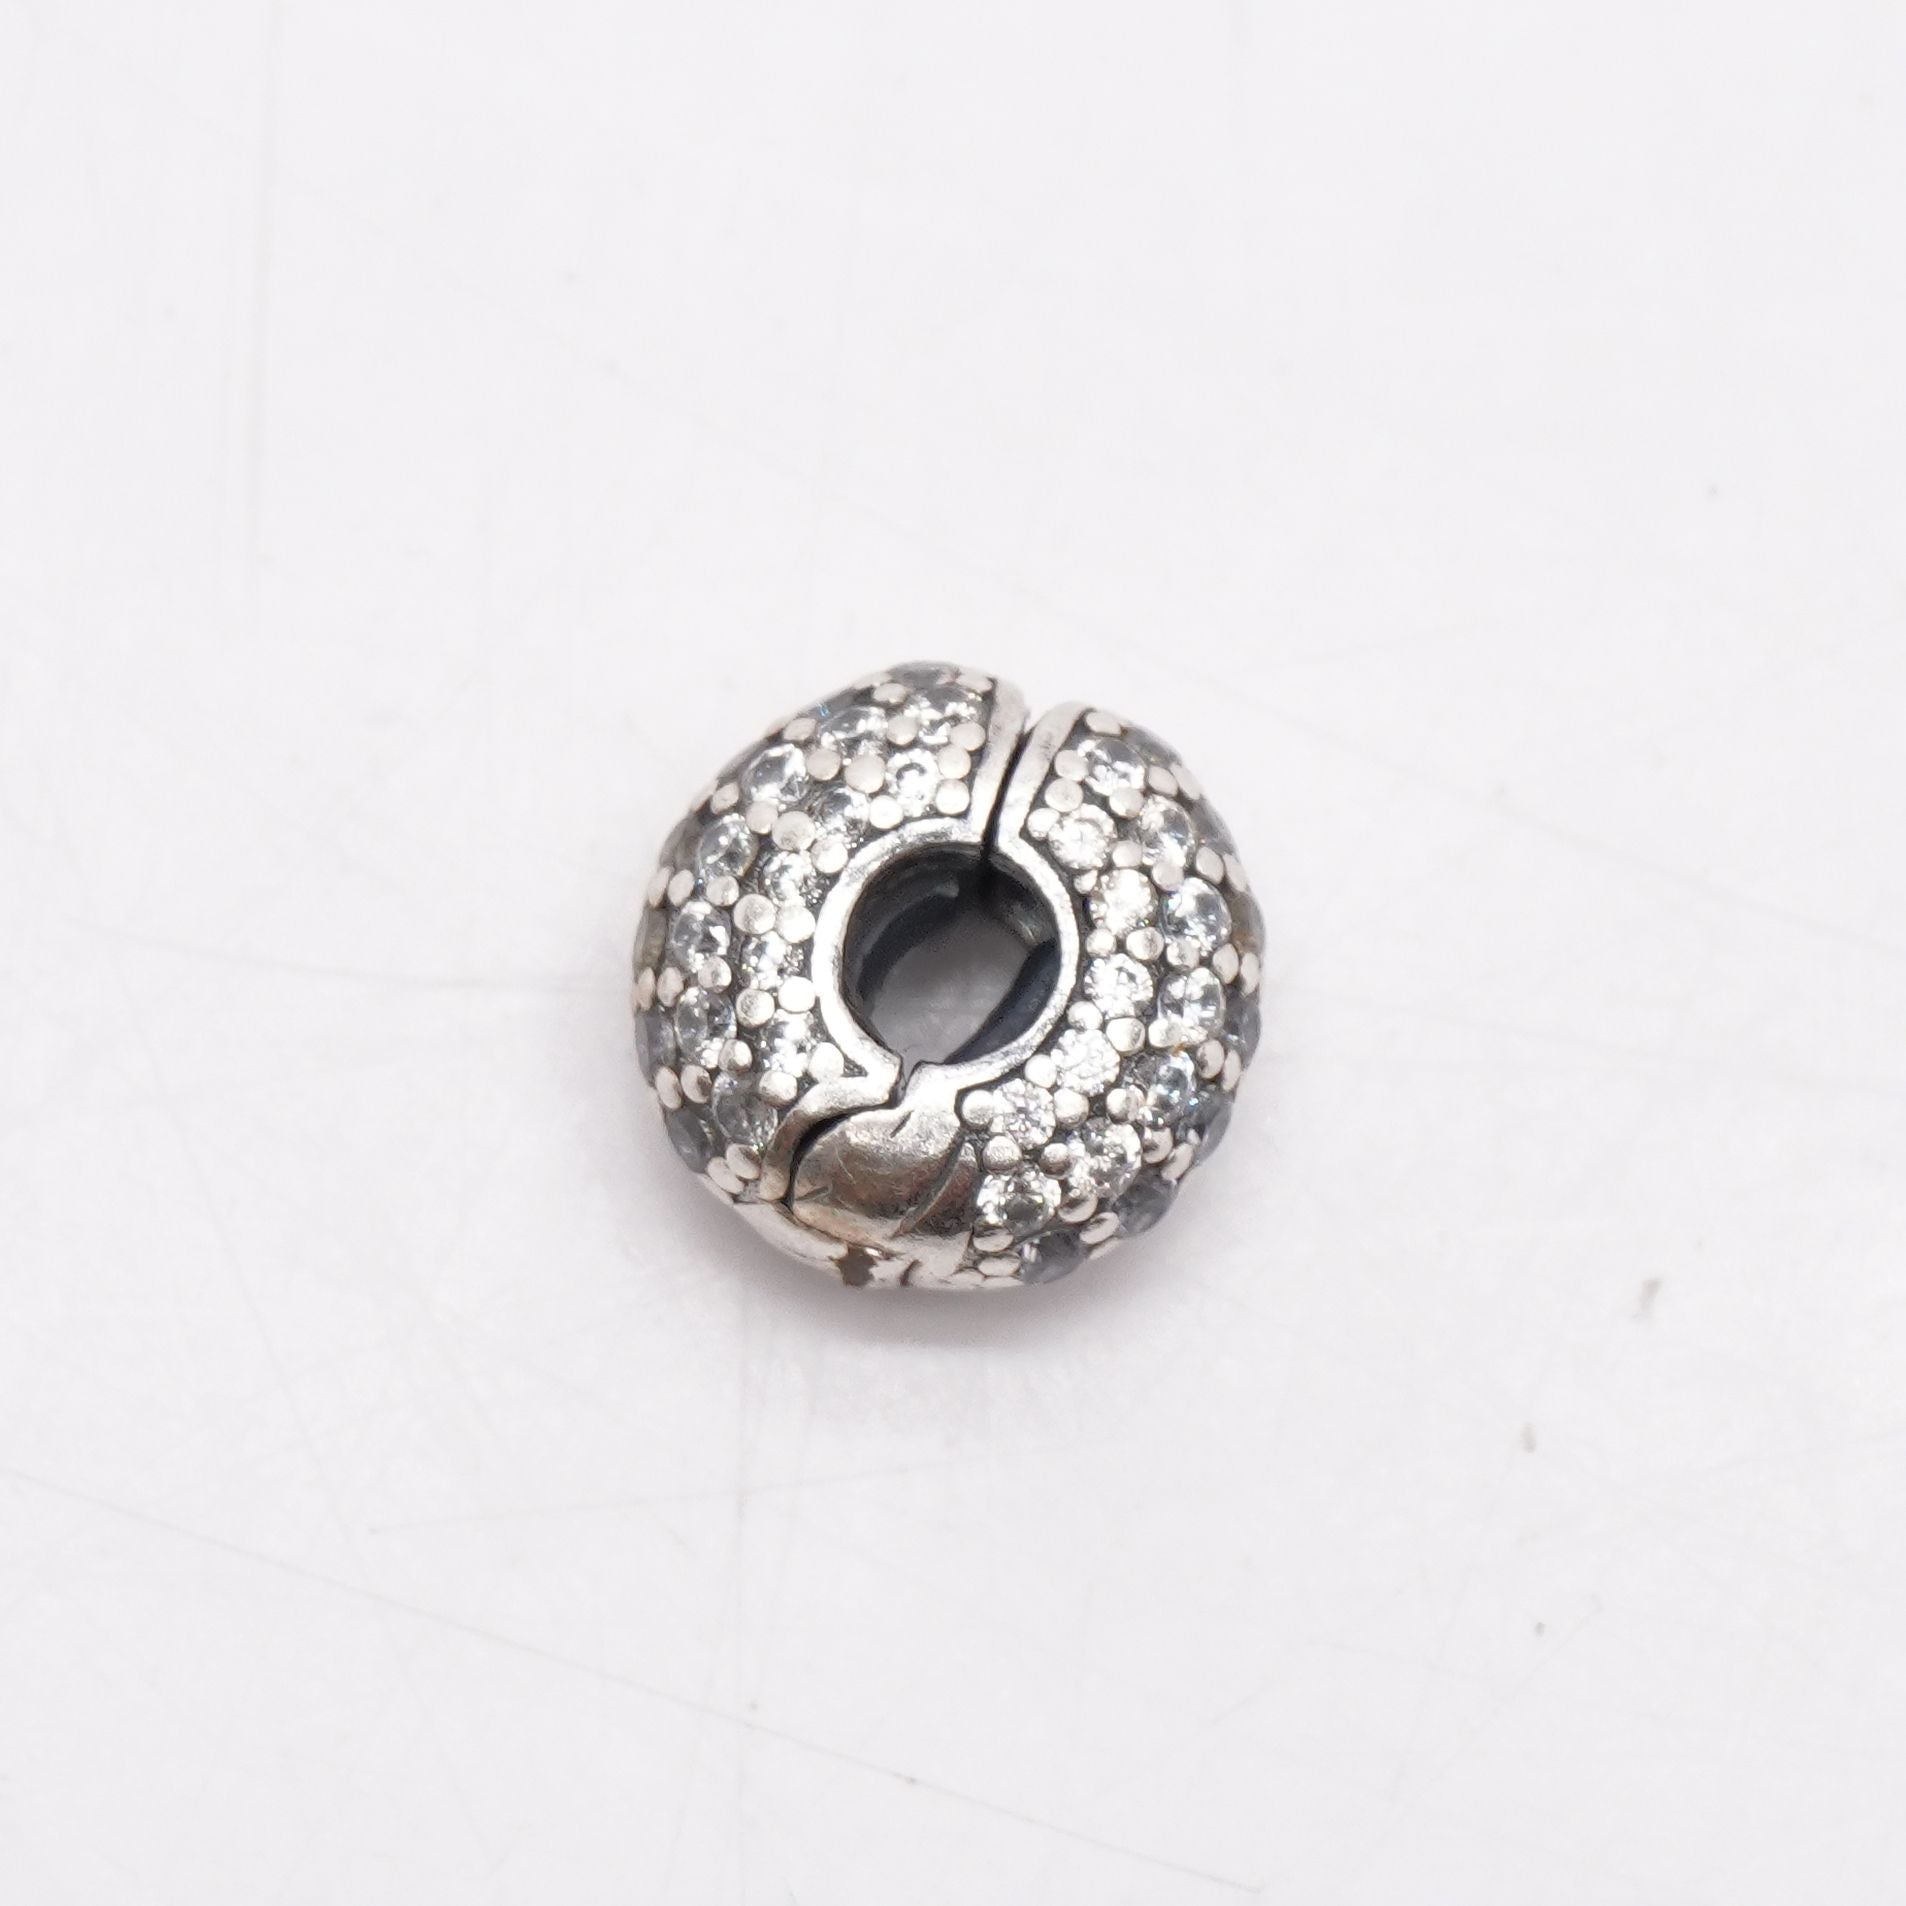 Sparkling Row Spacer Charm